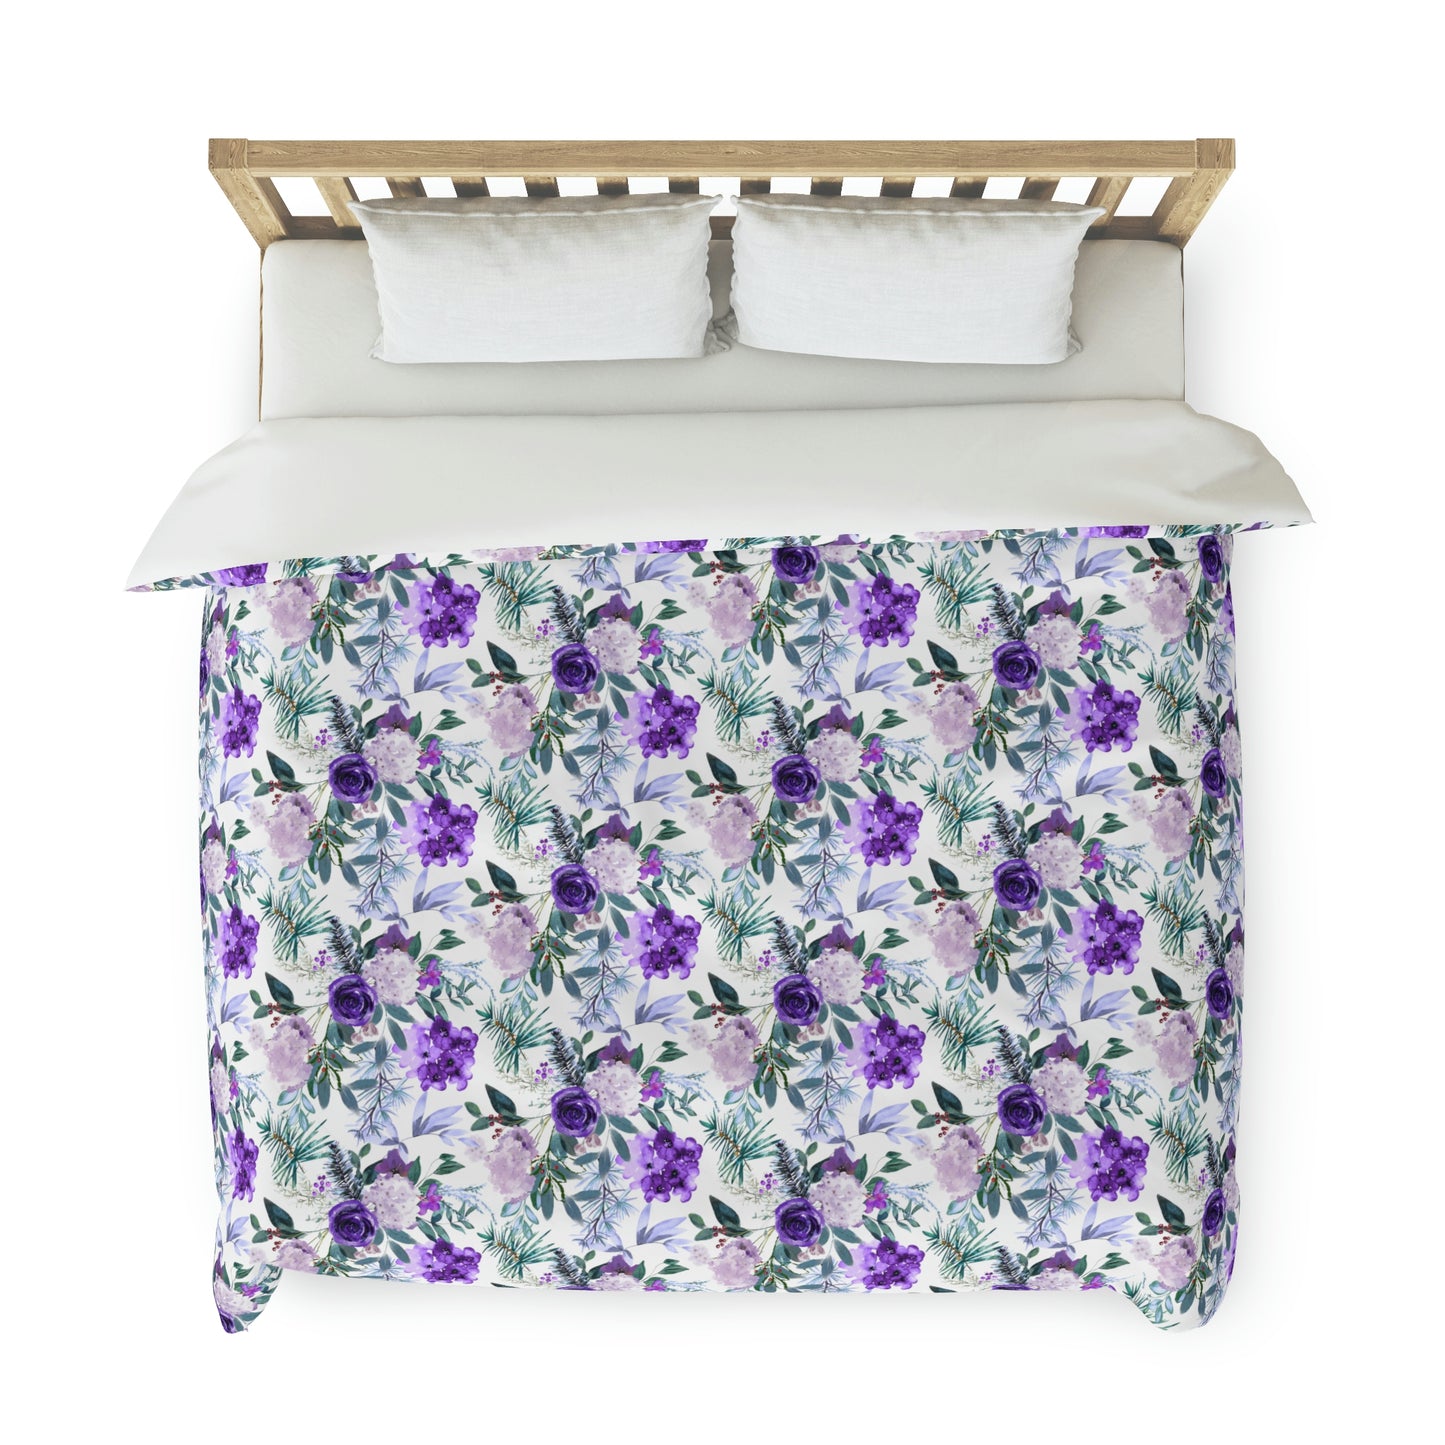 Watercolor Purple Floral Pattern Duvet lying on a bed, microfiber floral duvet cover bedroom accent